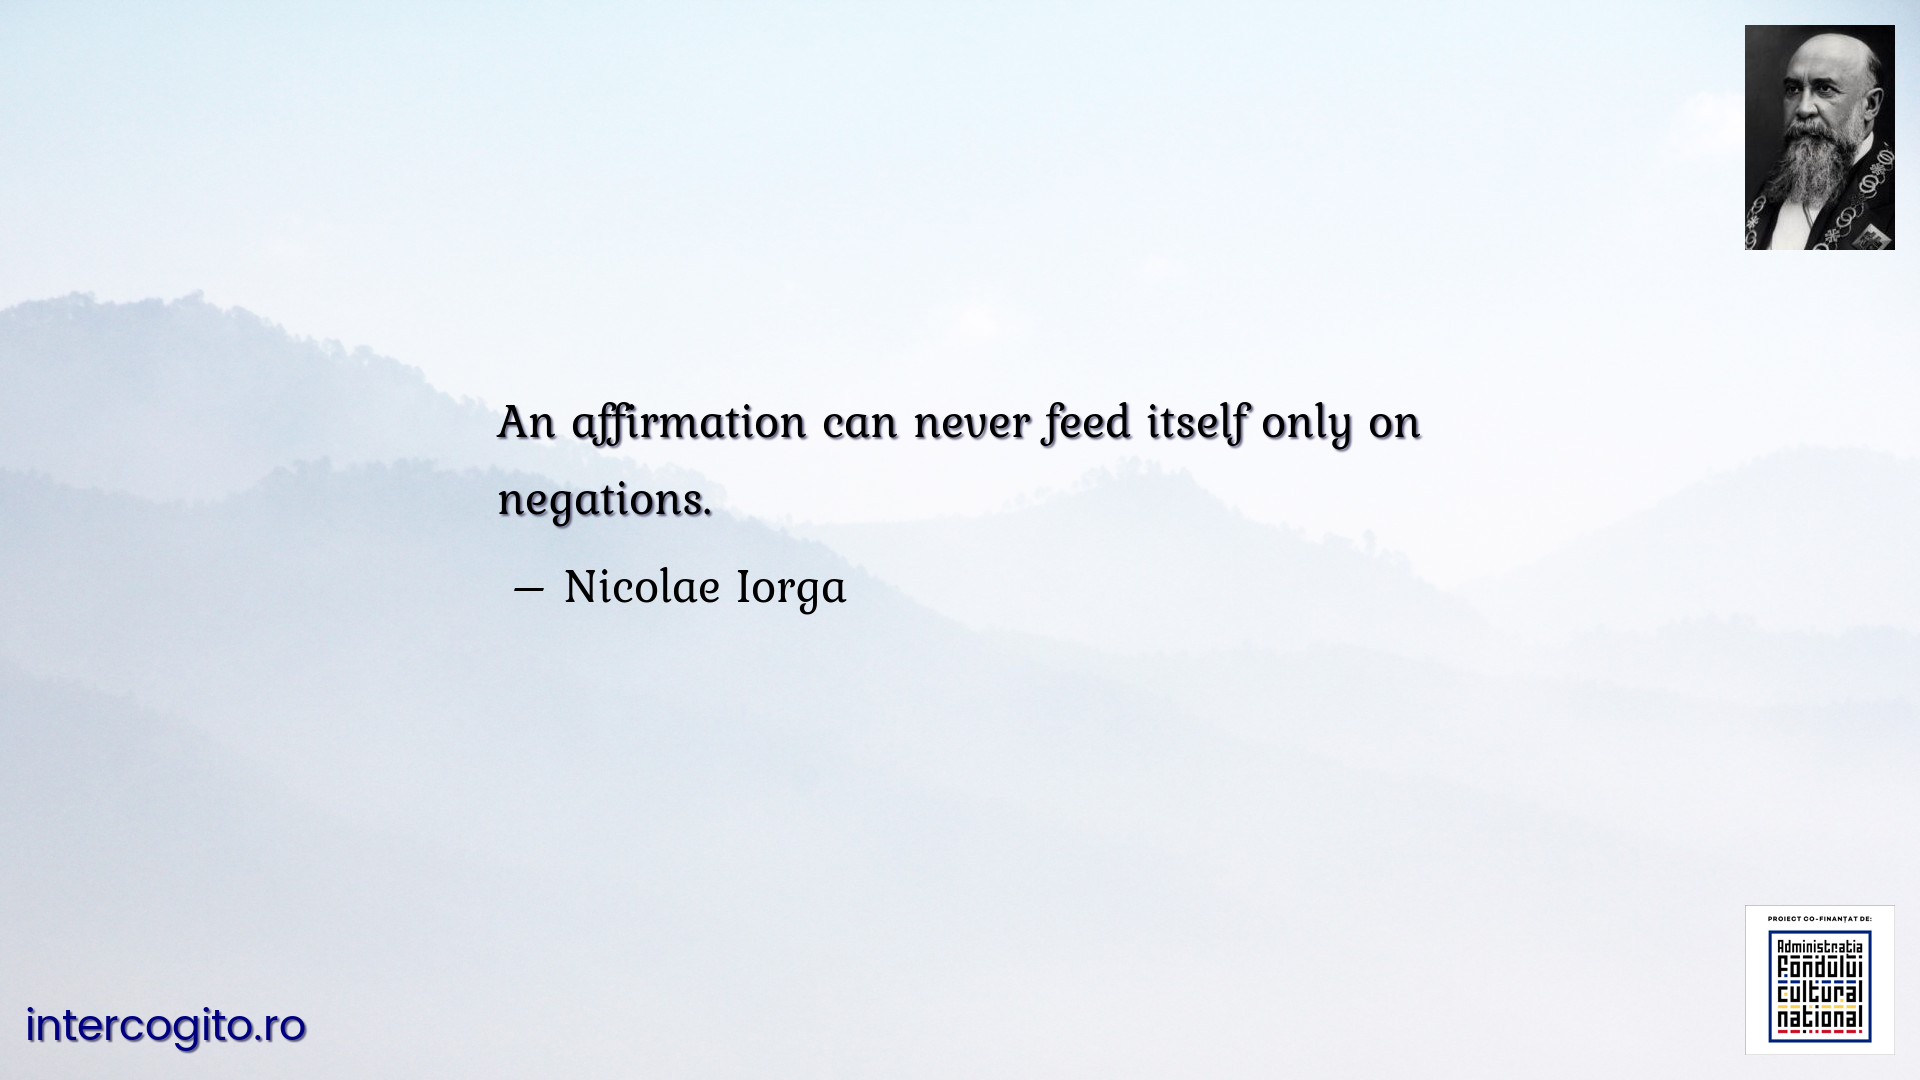 An affirmation can never feed itself only on negations.